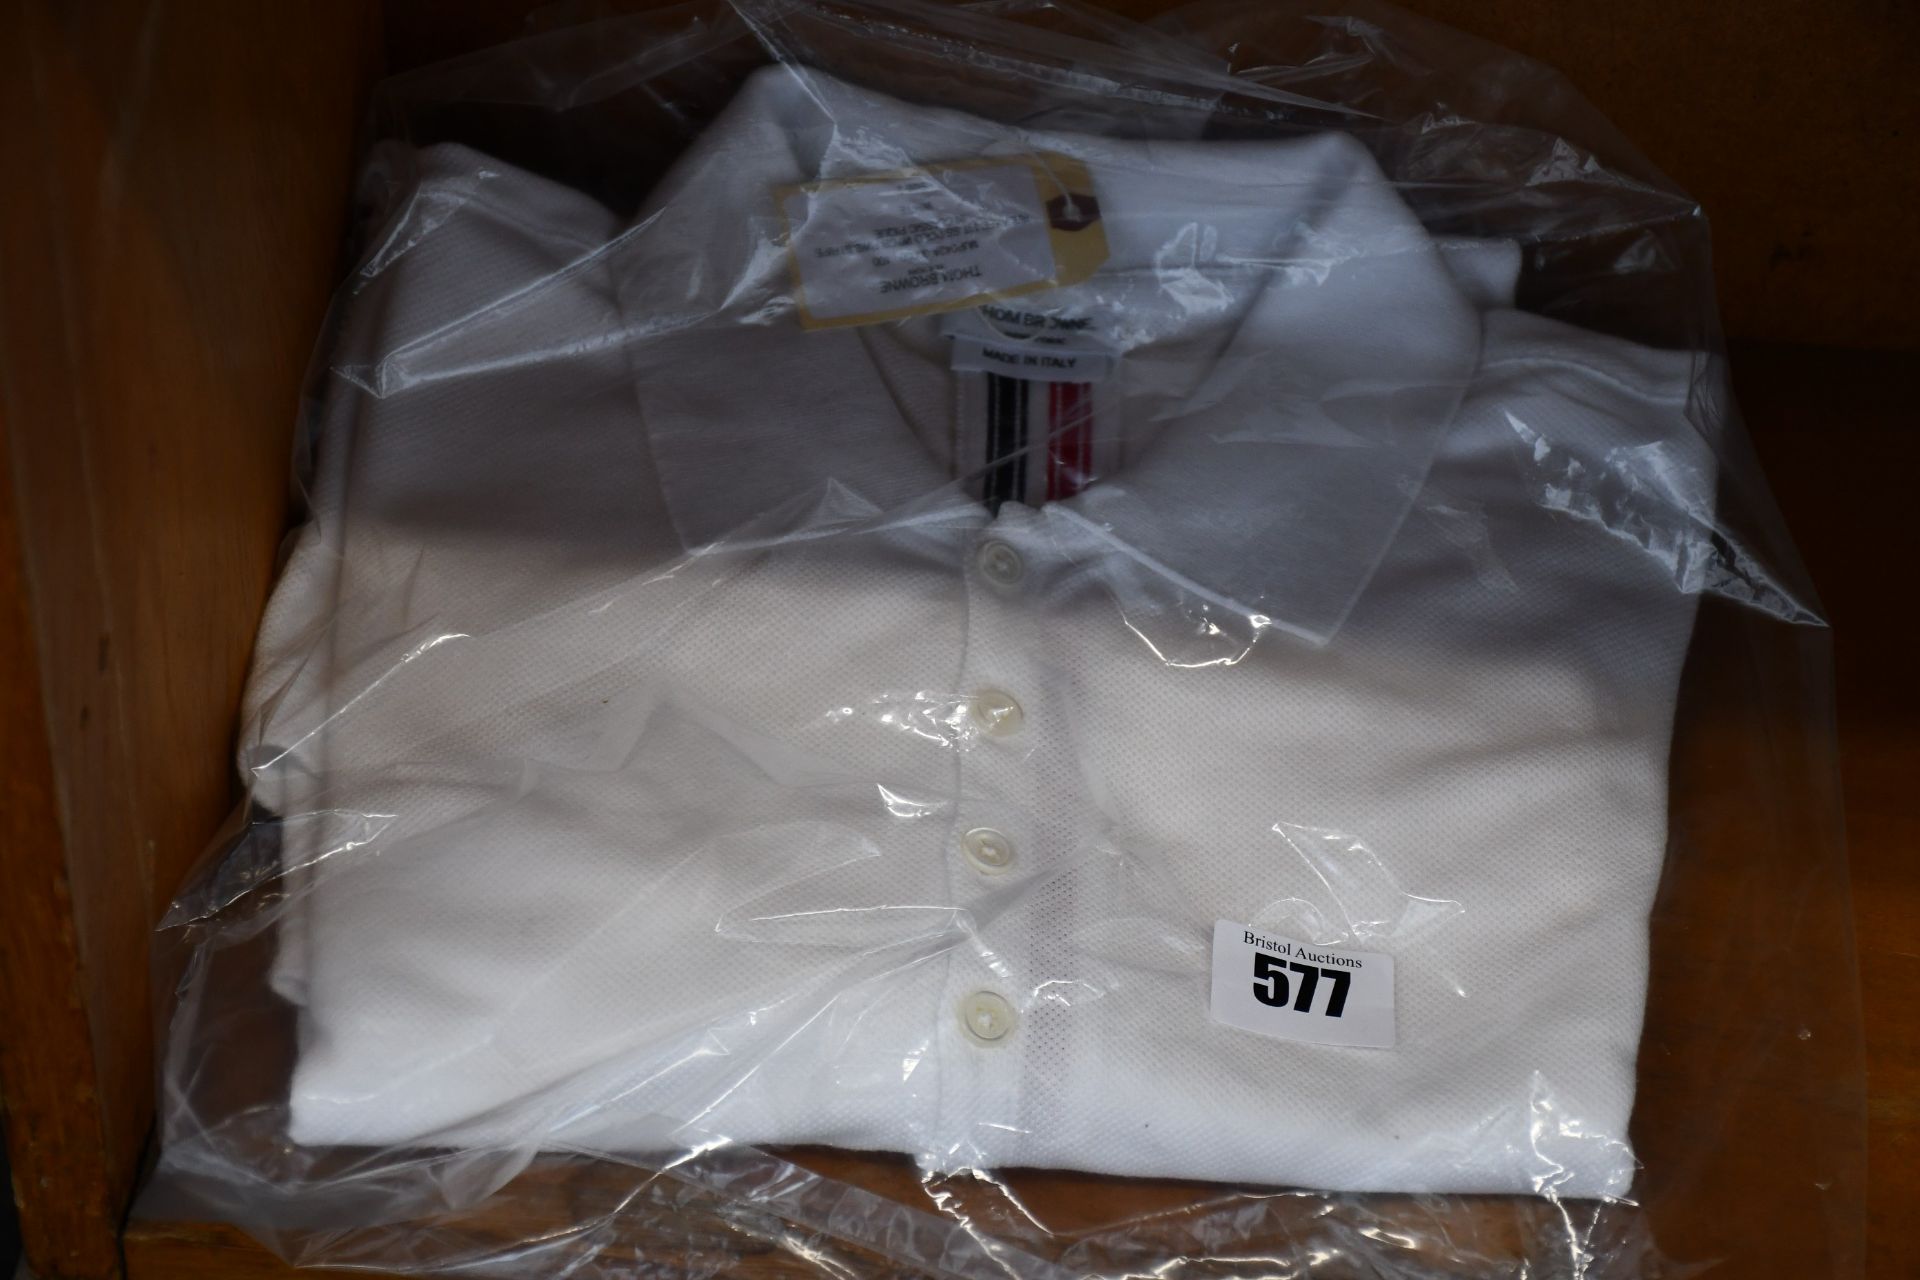 An as new Thom Browne white polo shirt (Size 2).